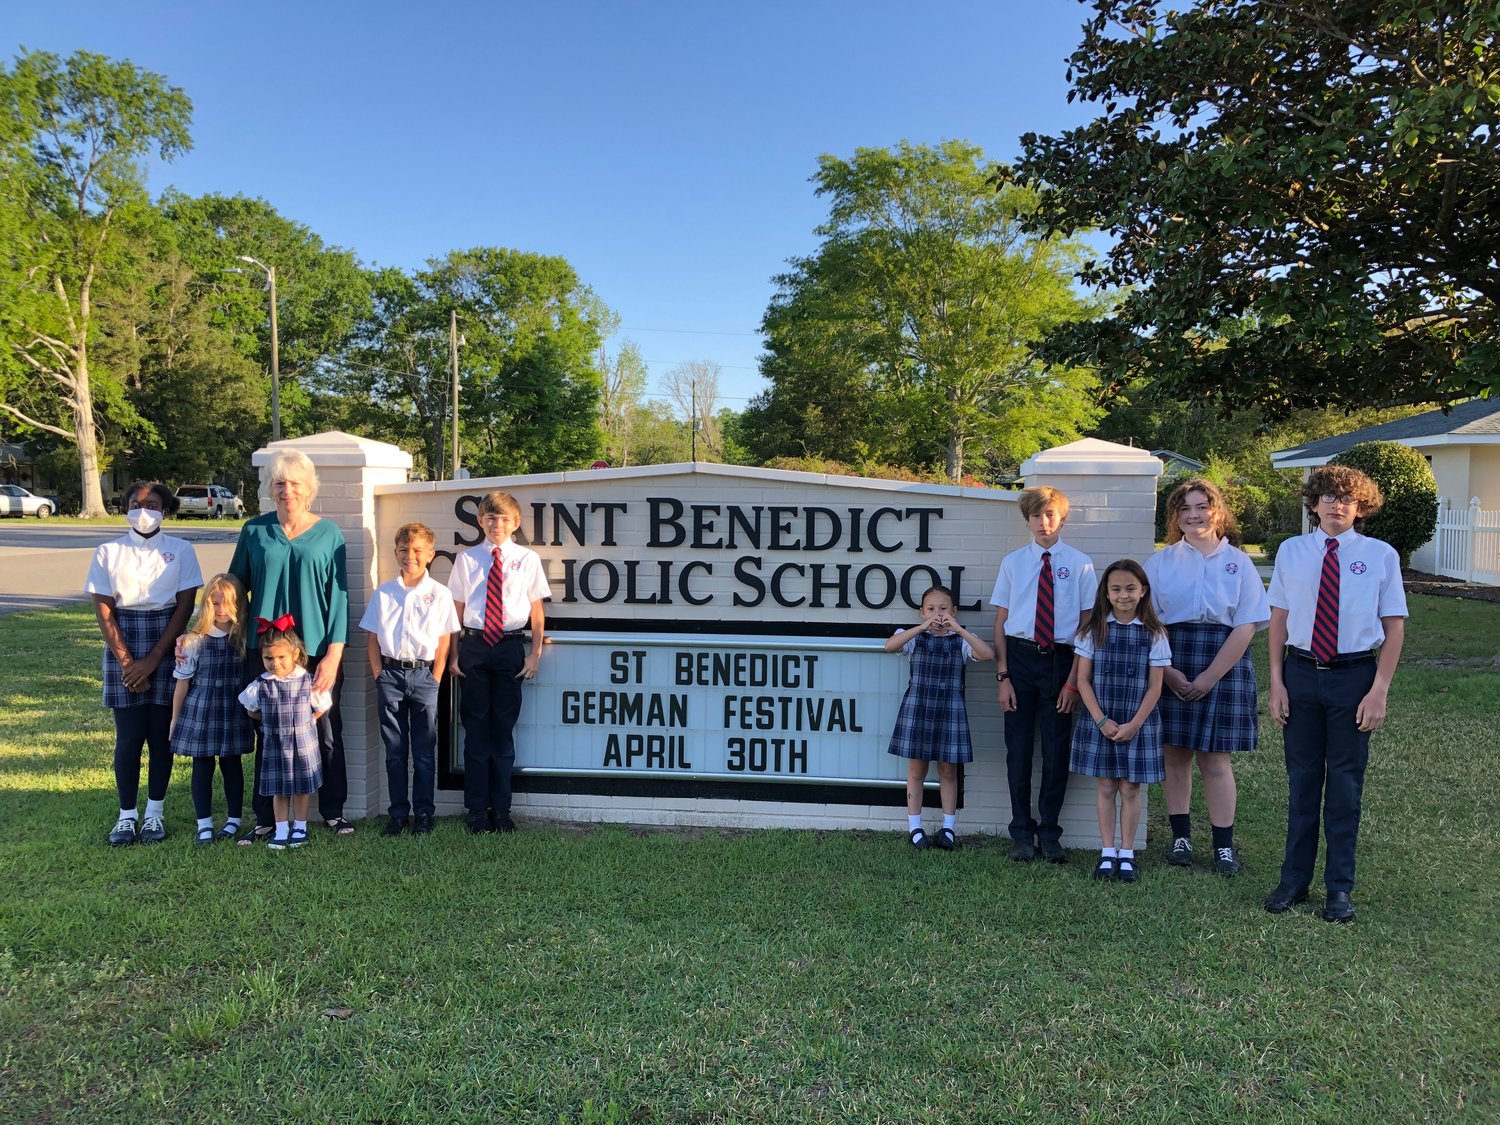 Pictured here, from left: Shariann Simms, Carsyn Faulk, Dr. Kathy McCool, Kimber Hicks, Grayson Box, John Michael Schumacher, Madison Braughton, Walker Box, Hadley Verret, Annabel Ewing, and Tripp Vogtner. St. Benedict staff and students are gearing up for the upcoming German Festival.